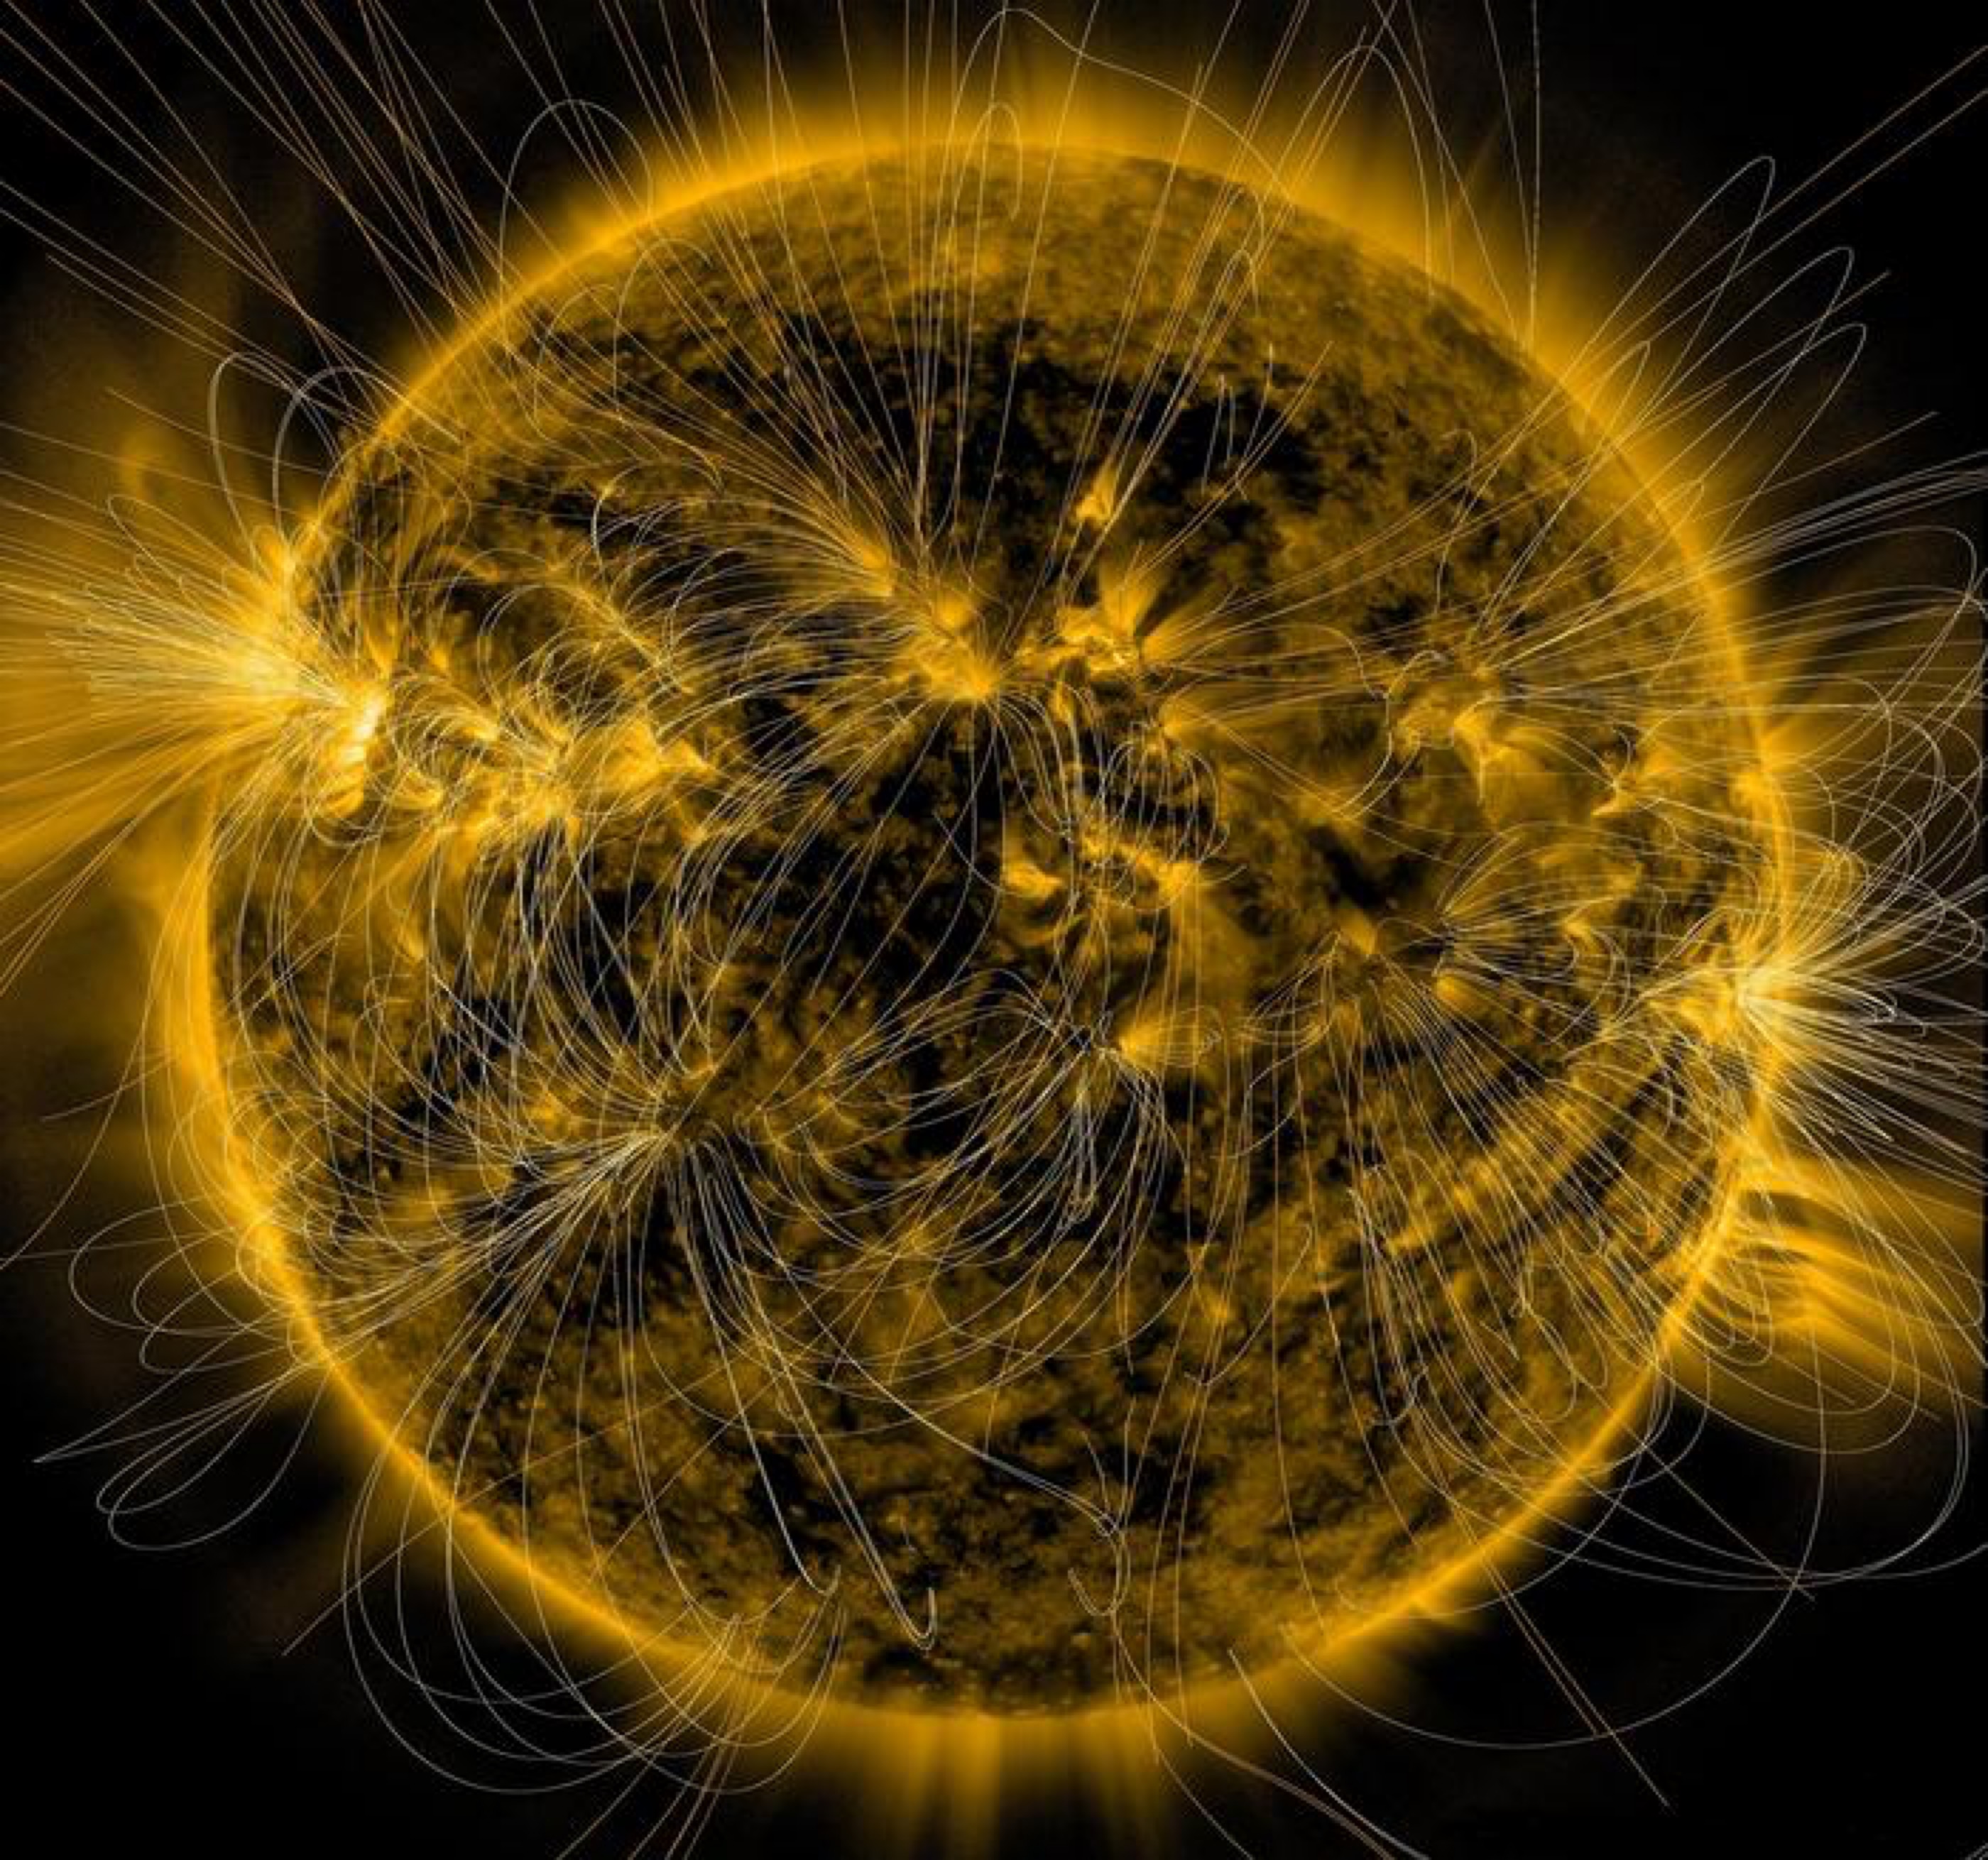 This illustration lays a depiction of the sun's magnetic field over an image captured by NASA’s Solar Dynamics Observatory.